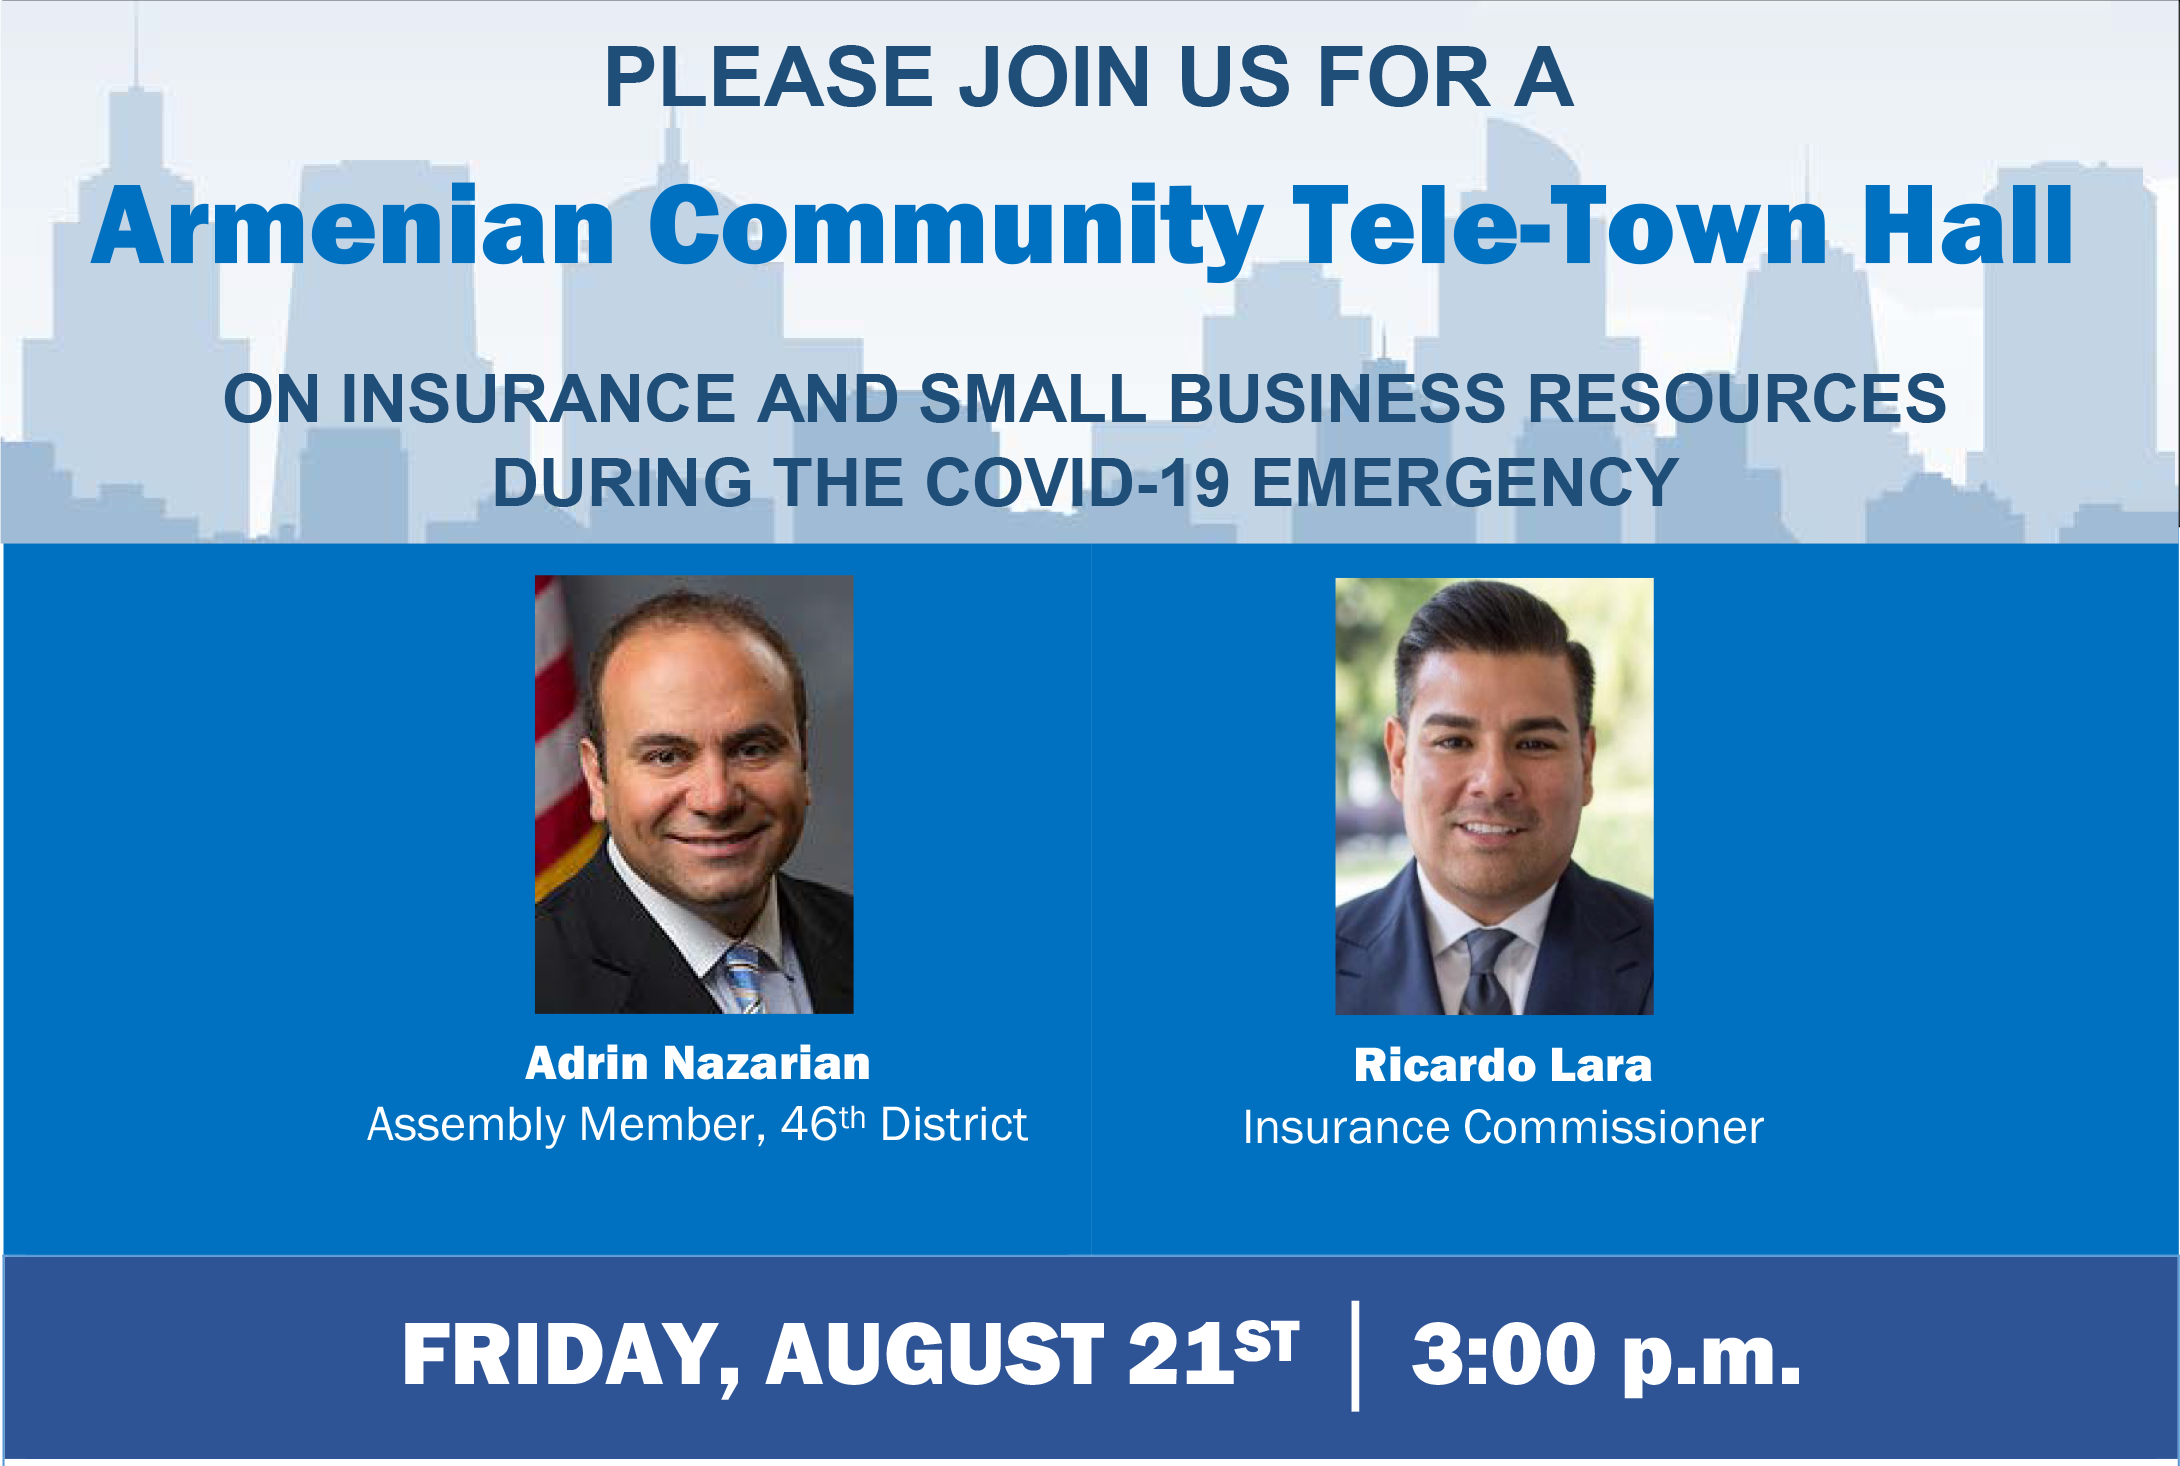 Please join us for a Armenian Community Tele-Town Hall ON INSURANCE AND SMALL BUSINESS RESOURCES DURING THE COVID-19 EMERGENCY with Assemblymember Adrin Nazarian and Insurance Commissioner Ricardo Lara